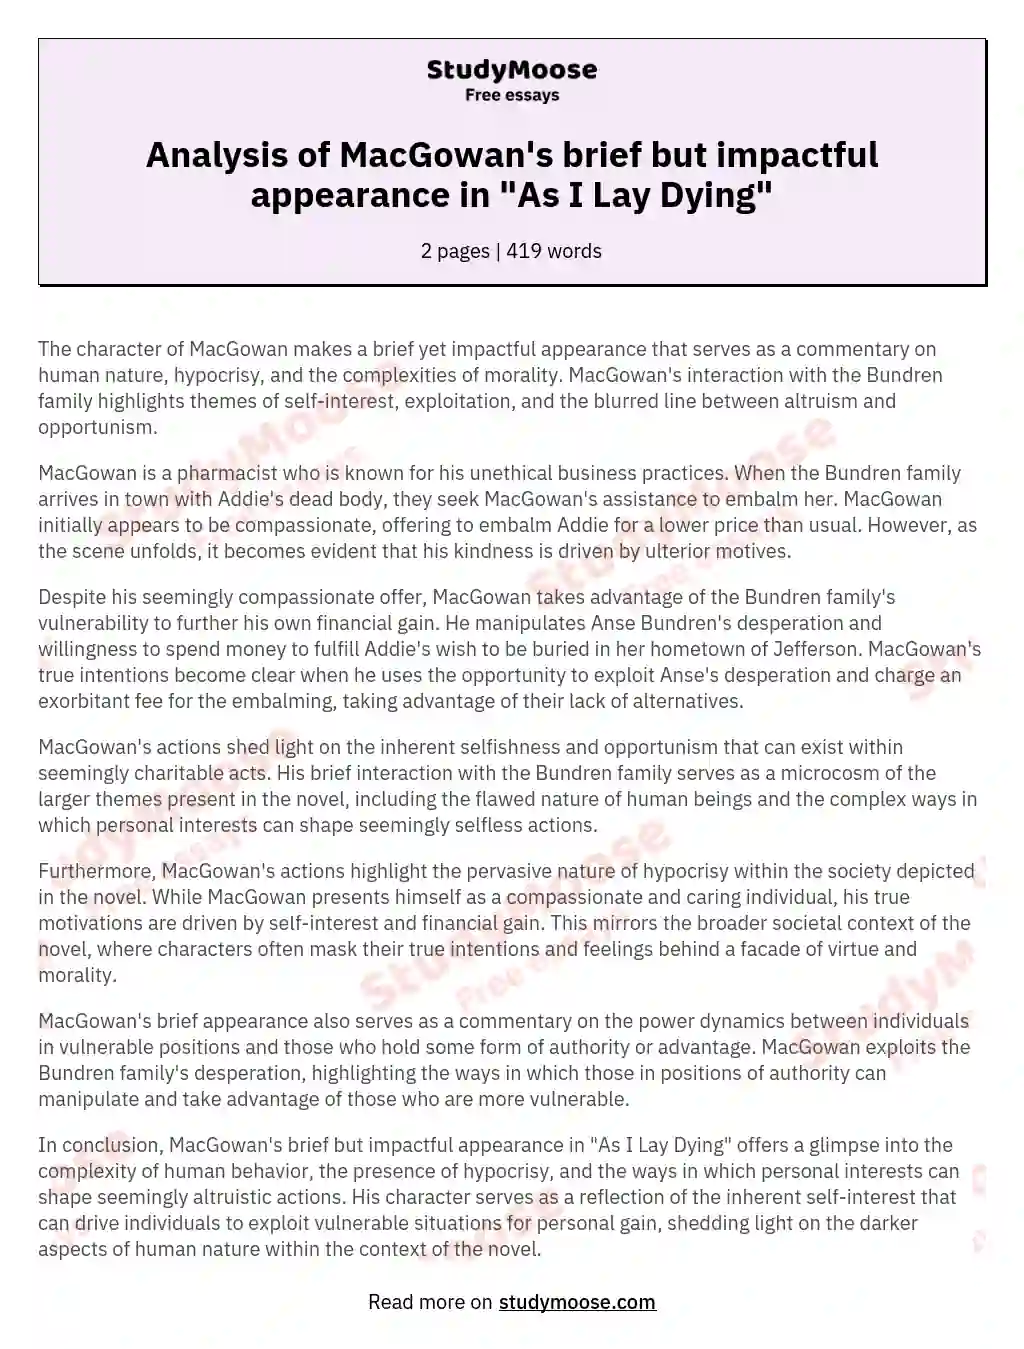 Analysis of MacGowan's brief but impactful appearance in "As I Lay Dying" essay